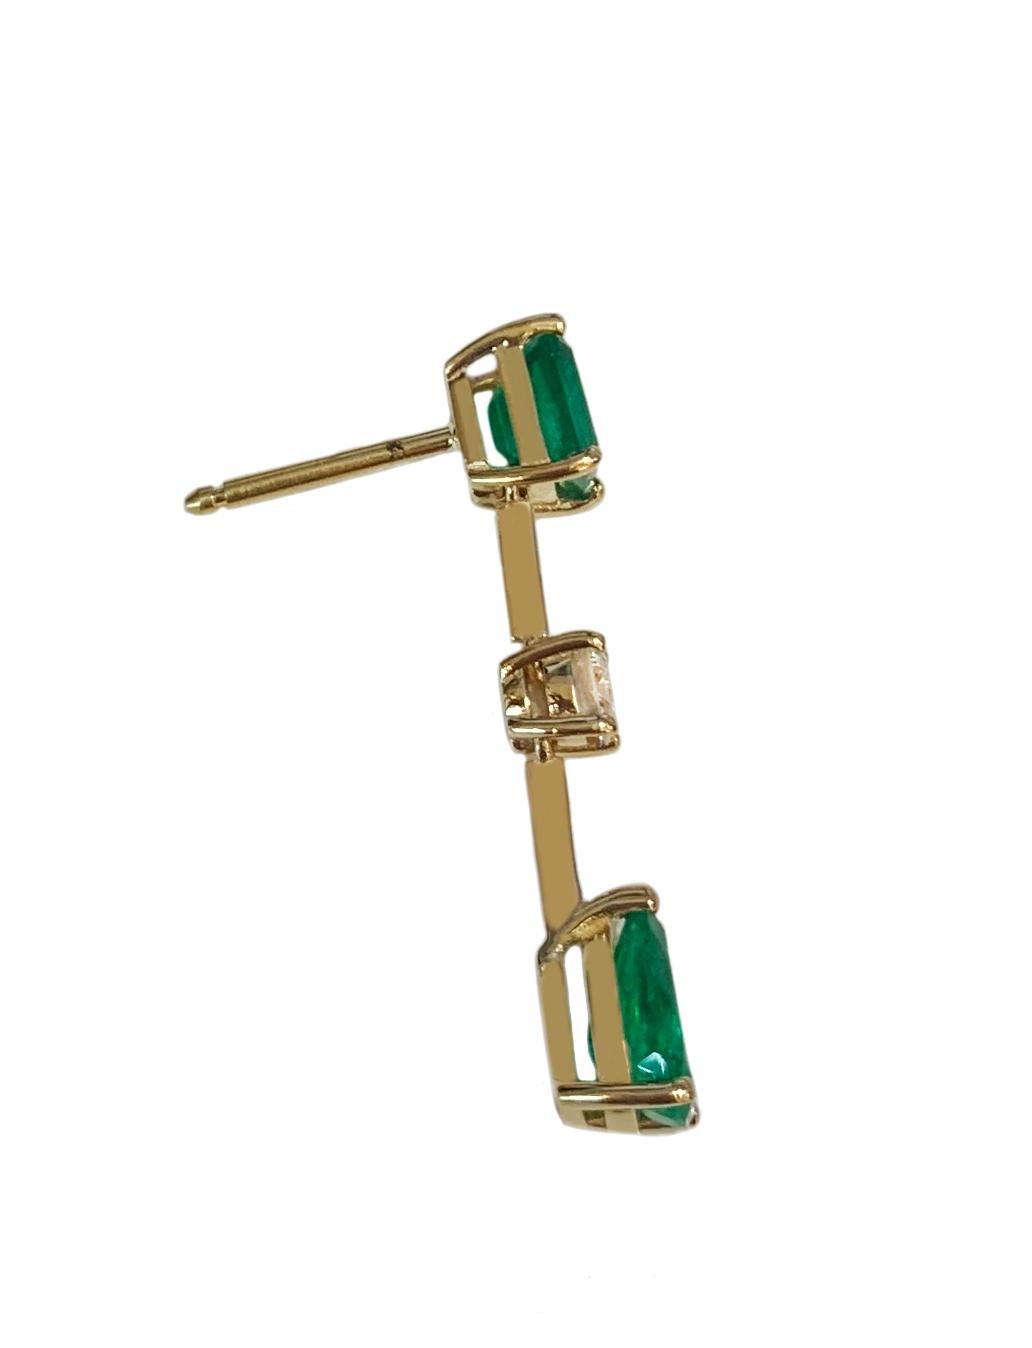 -18k Yellow Gold
-Length: 1.1”
-Emeralds: 2.1ct
-Pear: 2.65ct
-Diamonds: 0.3ct, VS clarity, G color
-Retail: $12000